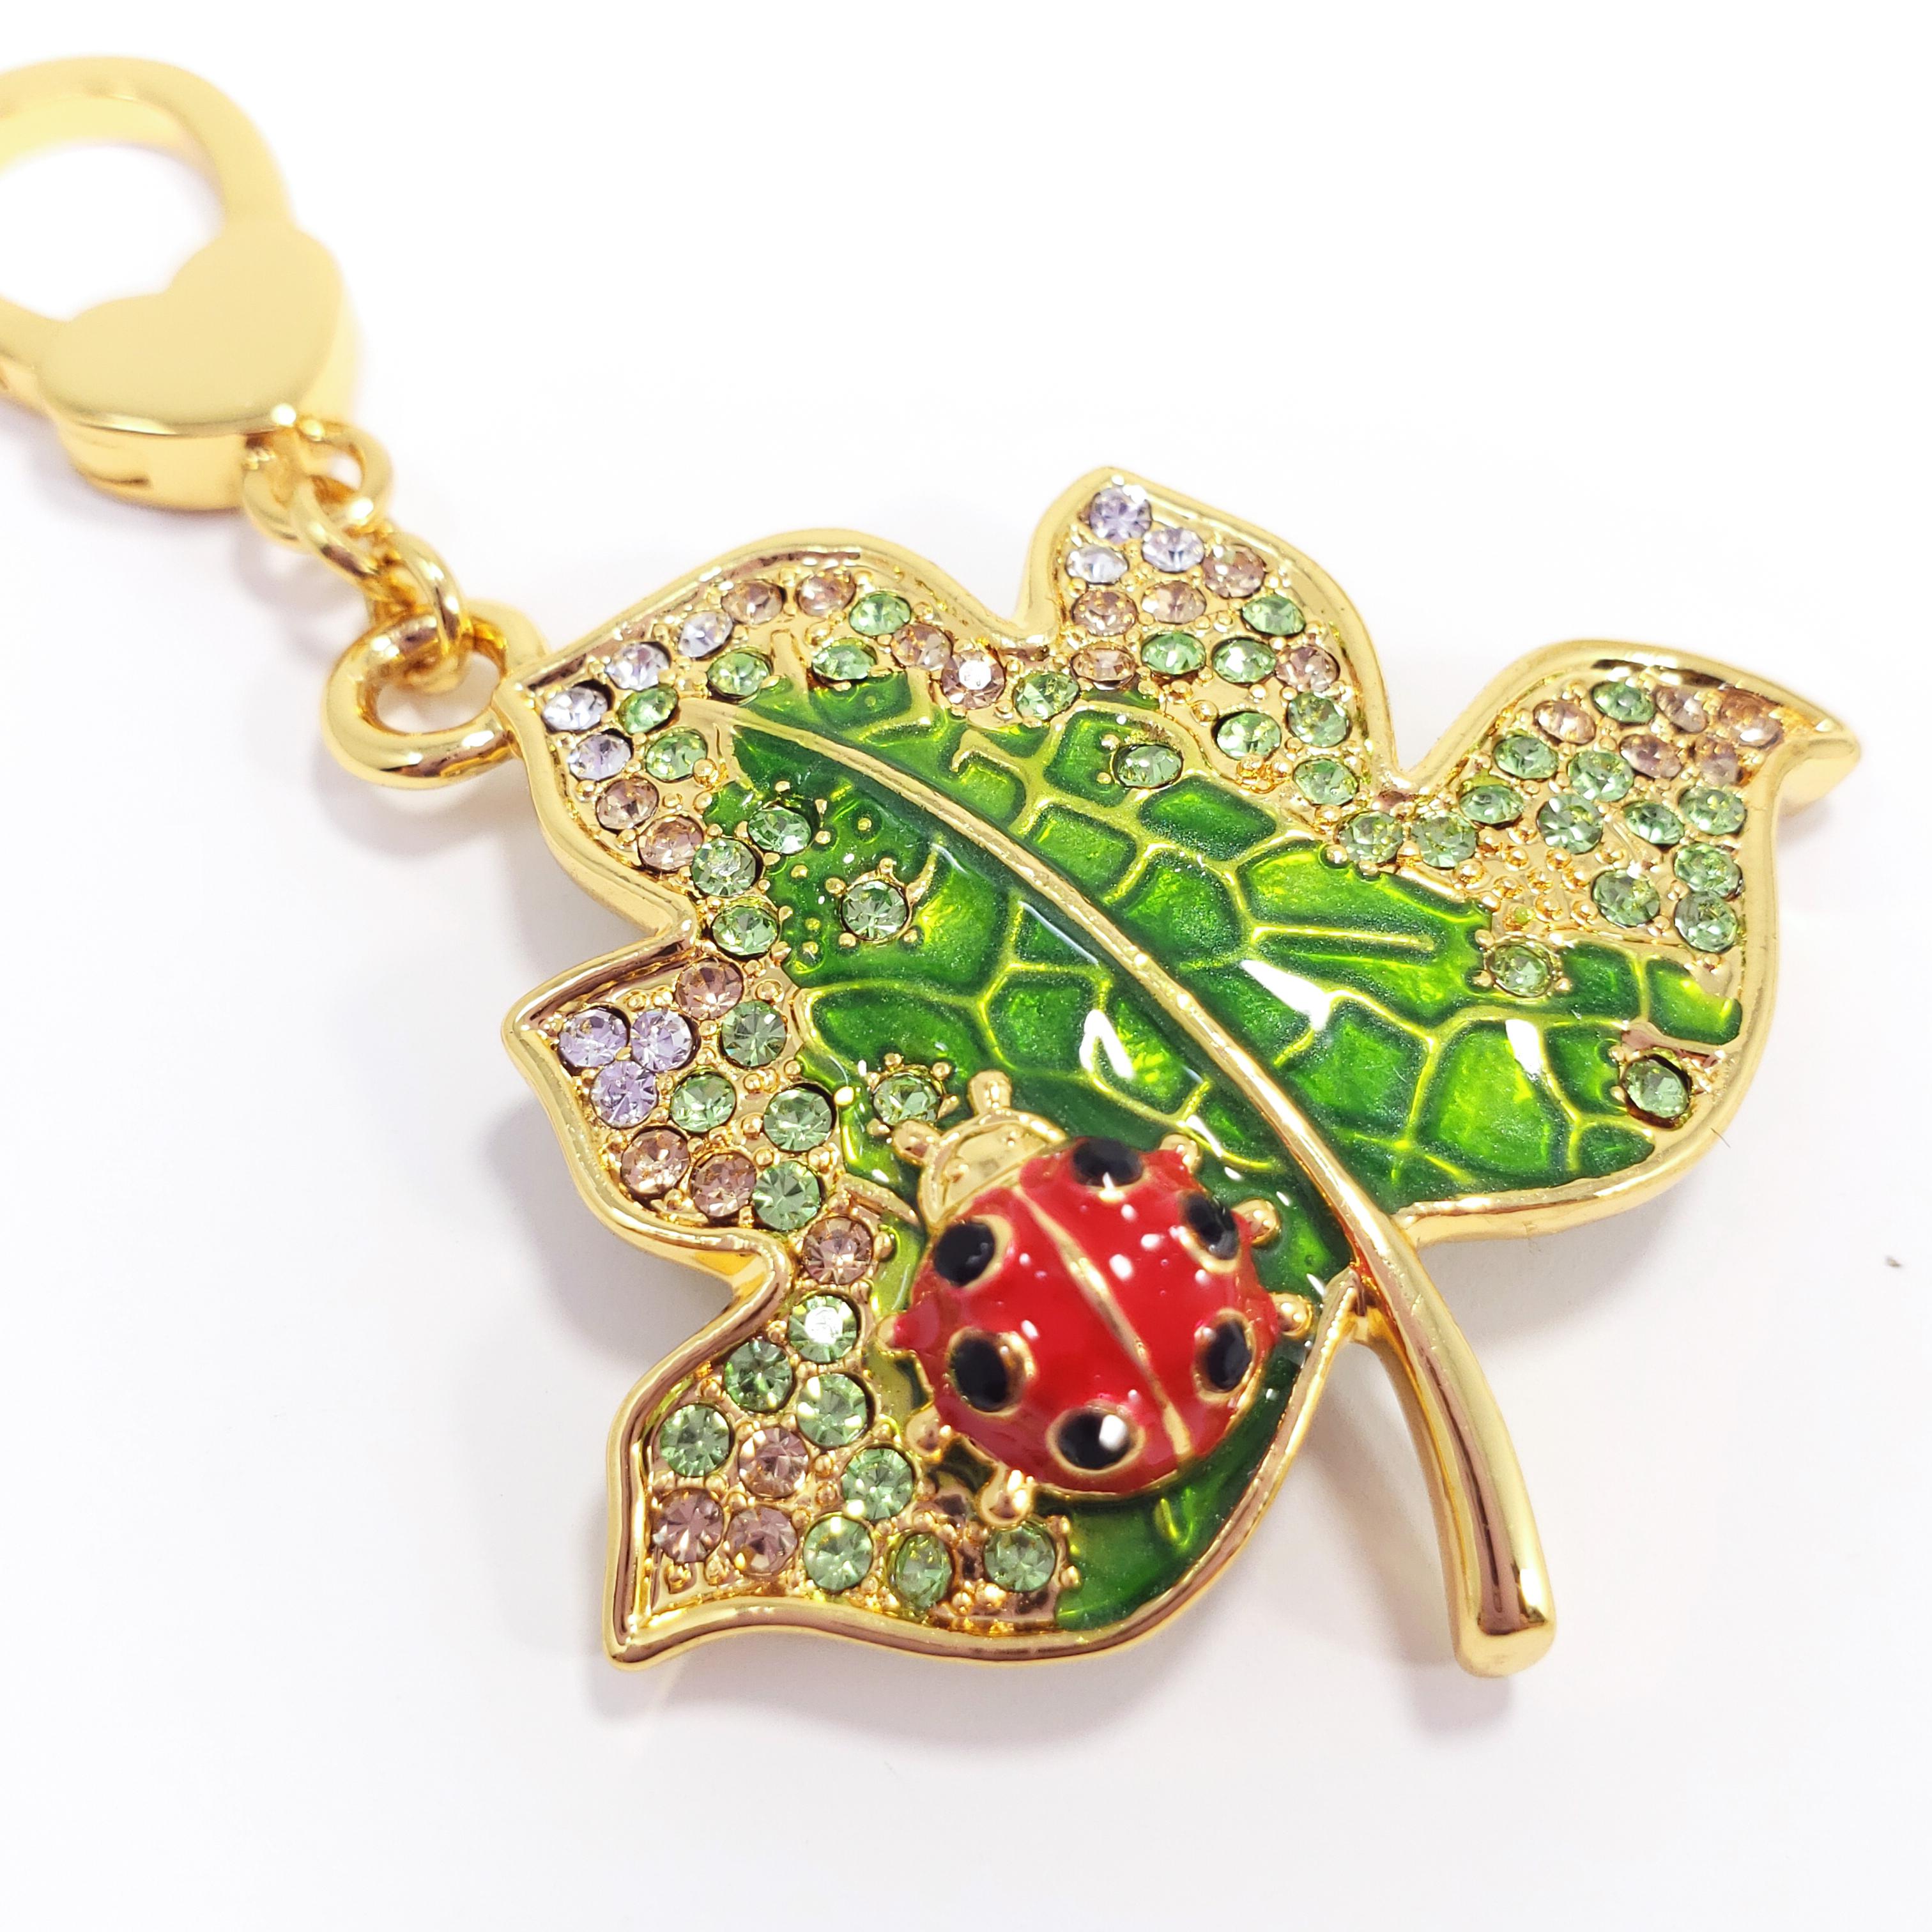 A whimsical leaf and ladybug charm, painted with green, red, and  black enamel, and accented with colorful crystals. Can be worn as a bracelet charm, a necklace pendant, or in a multitude of other creative ways.

Hallmarks: Jay, Jay Strongwater,